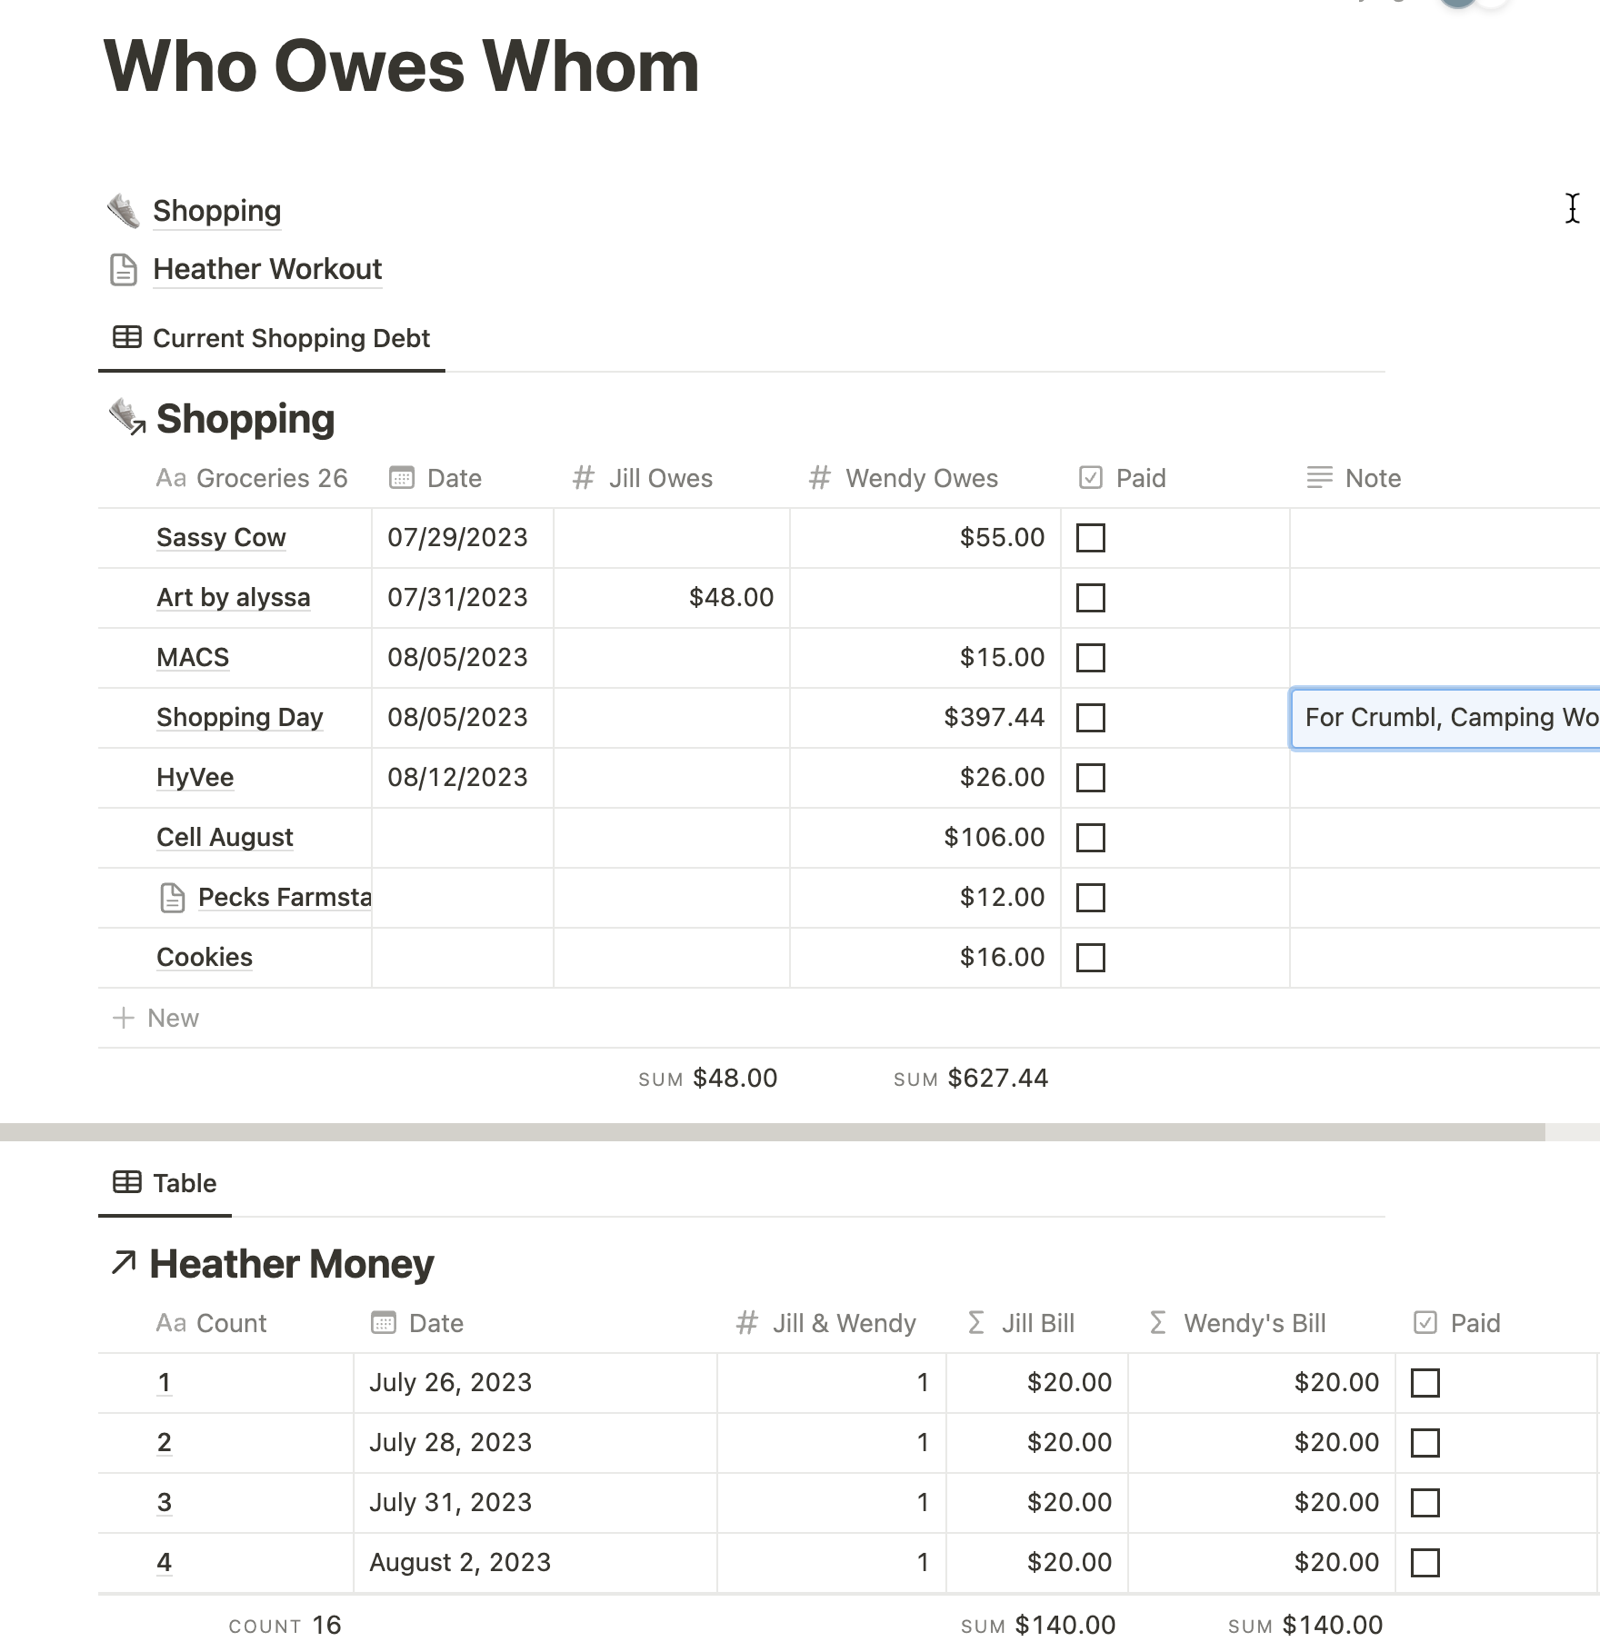 Who Owes Whom database with categories like shopping and dates